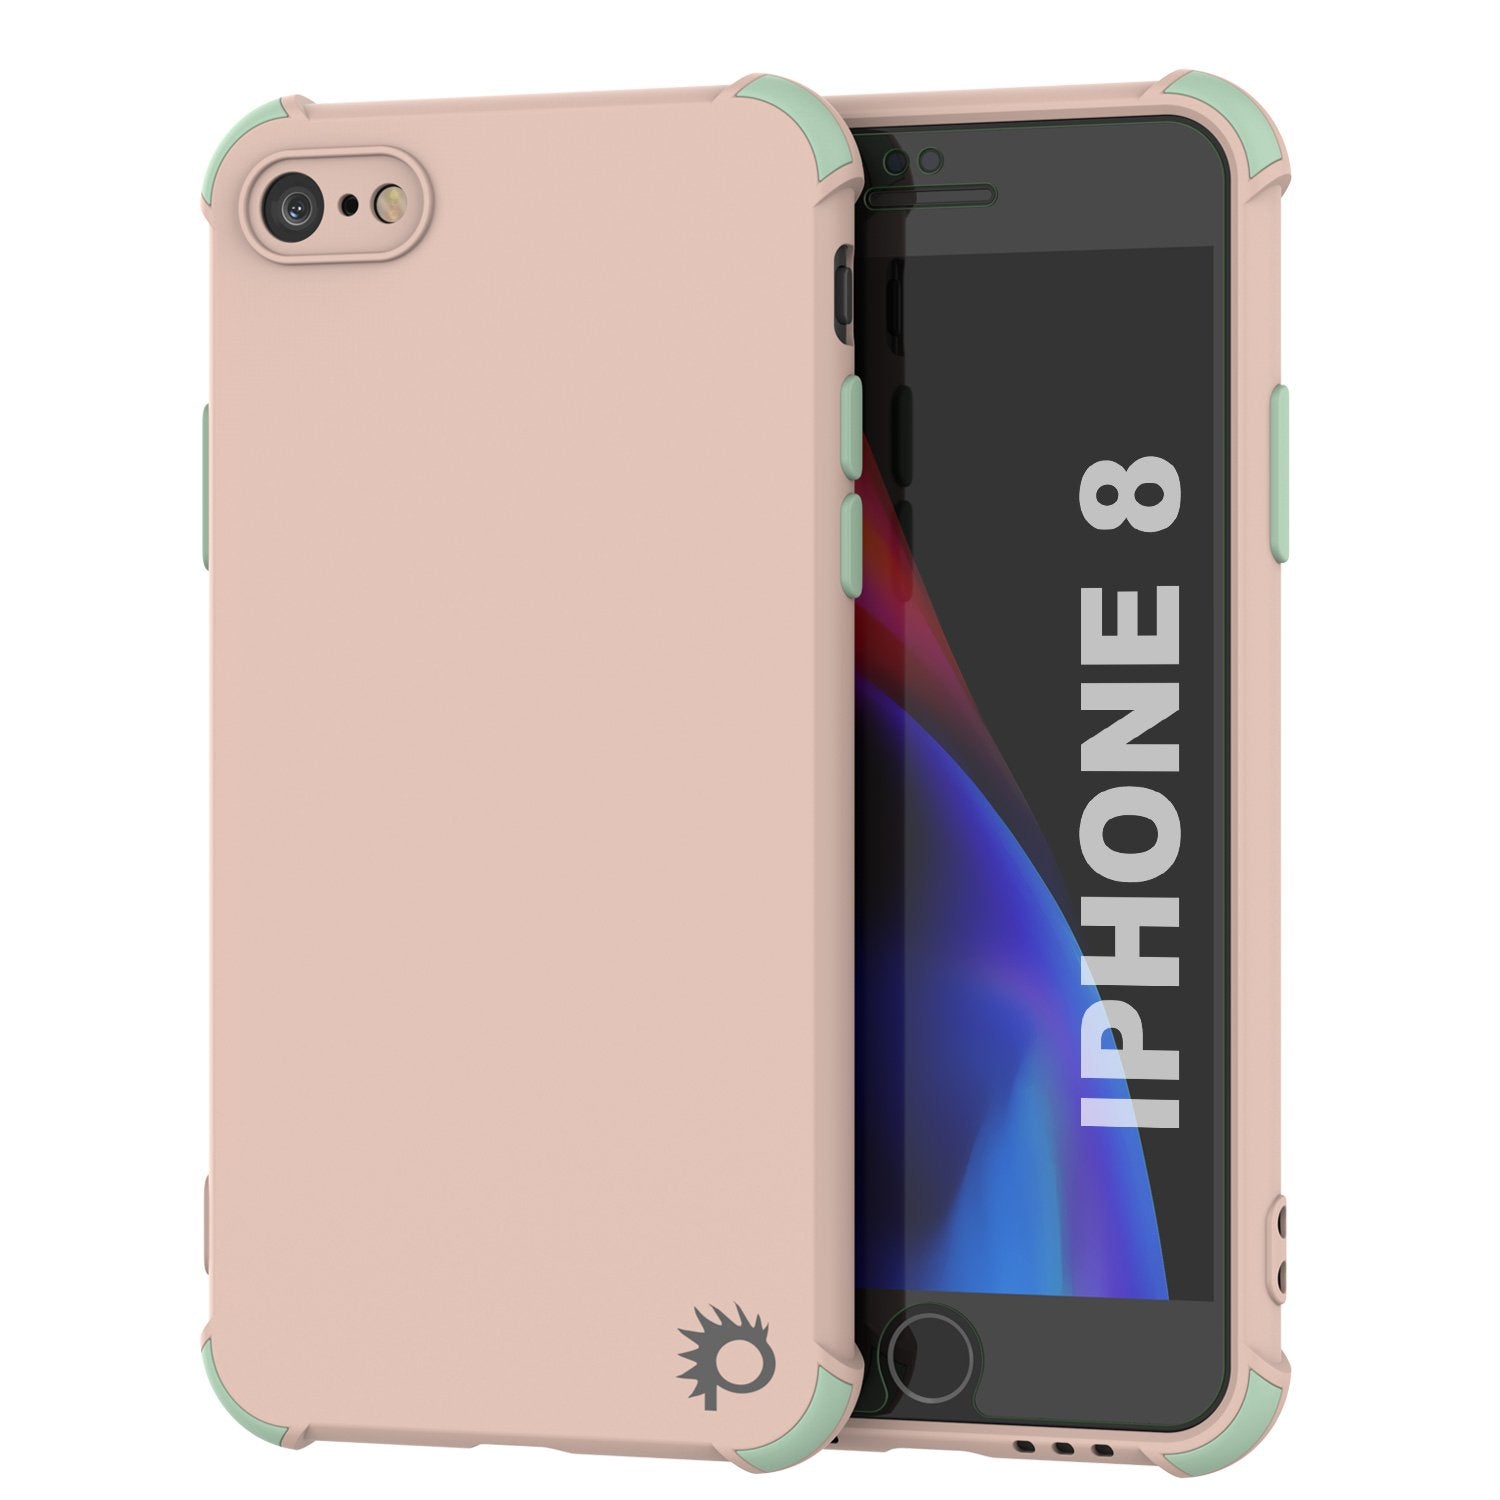 Punkcase Protective & Lightweight TPU Case [Sunshine Series] for iPhone 8 [Light Green]